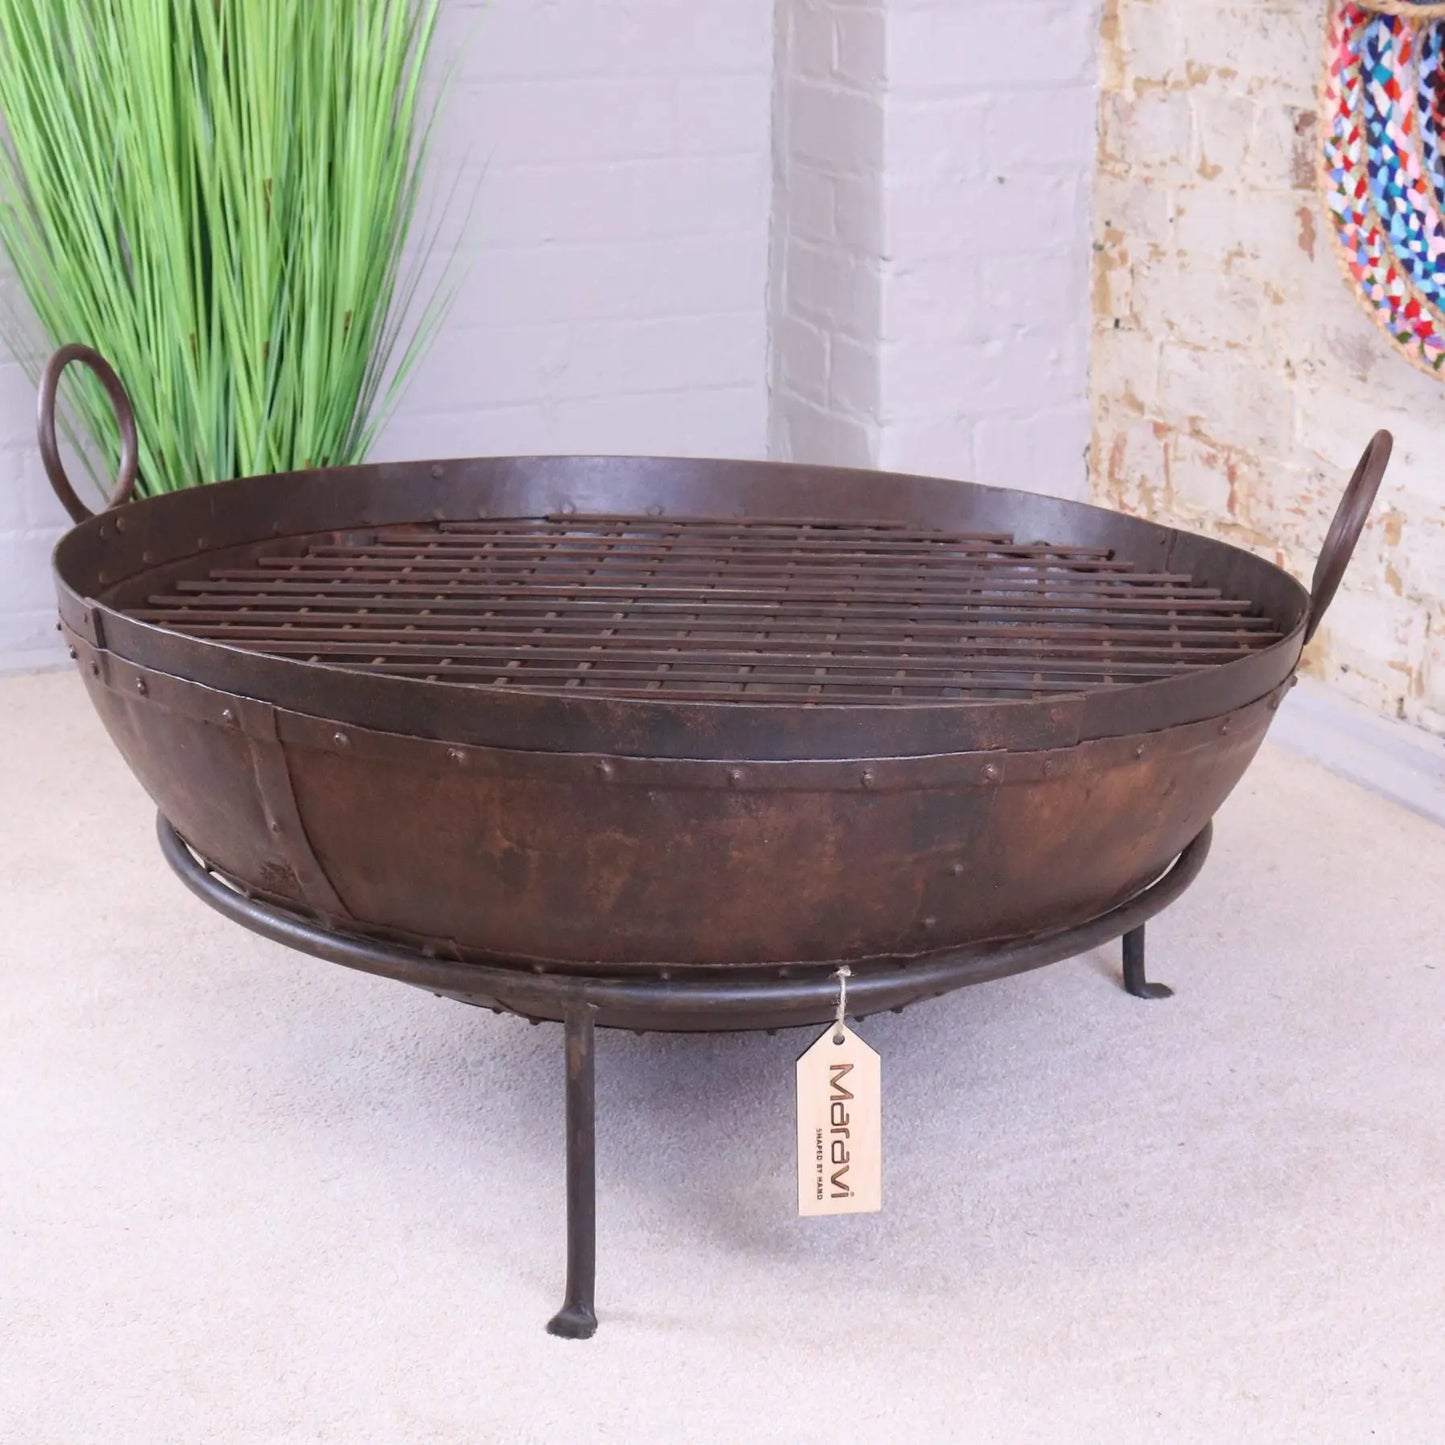 Vintage Kadai Bowl with Stand Garden Fire Pit Bowls  80cm Size Main Image